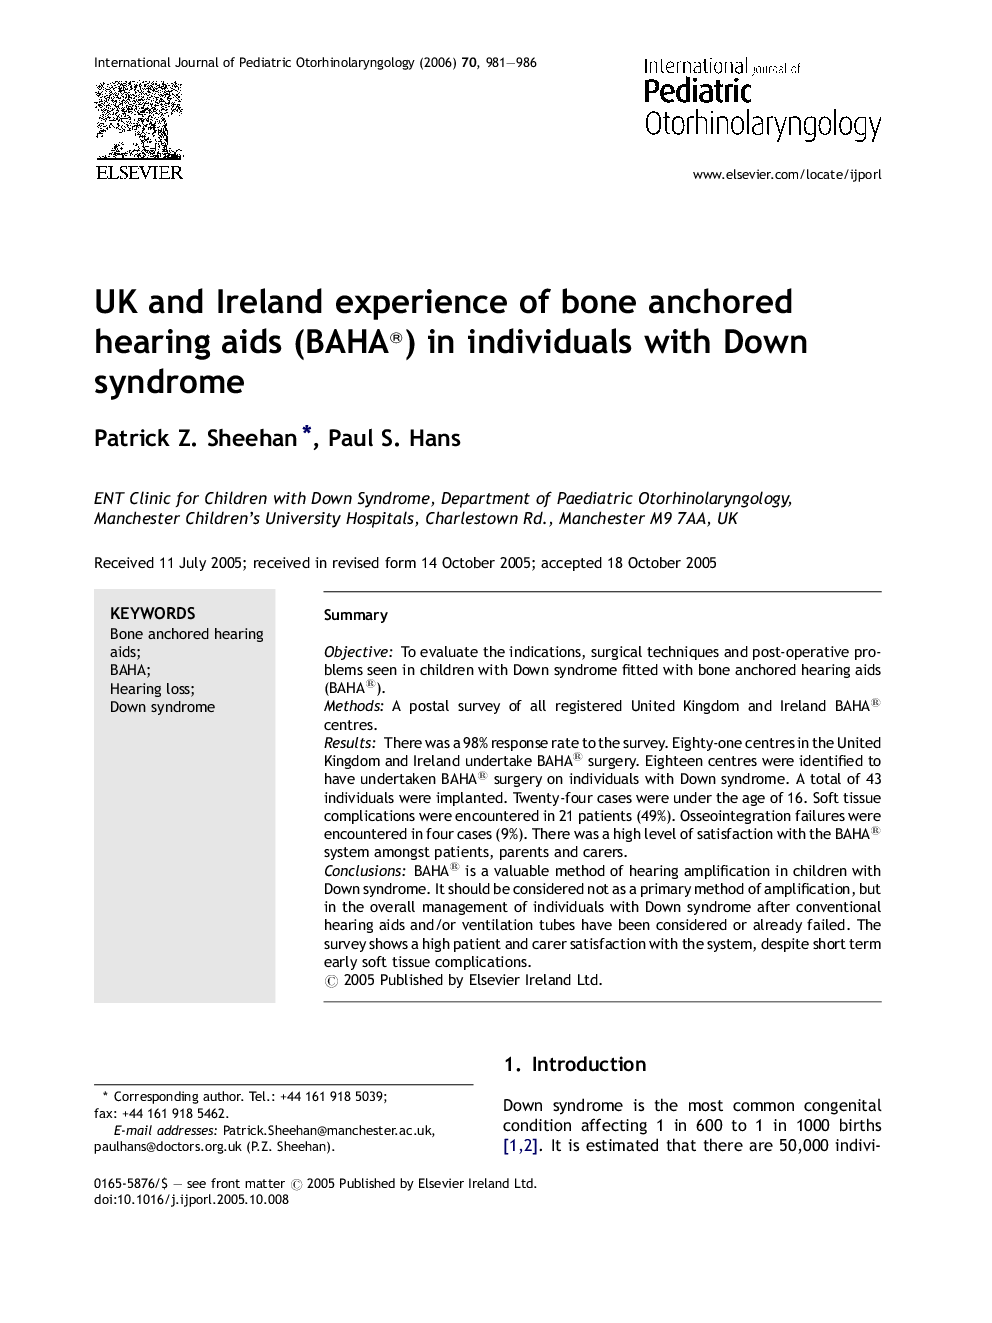 UK and Ireland experience of bone anchored hearing aids (BAHA®) in individuals with Down syndrome